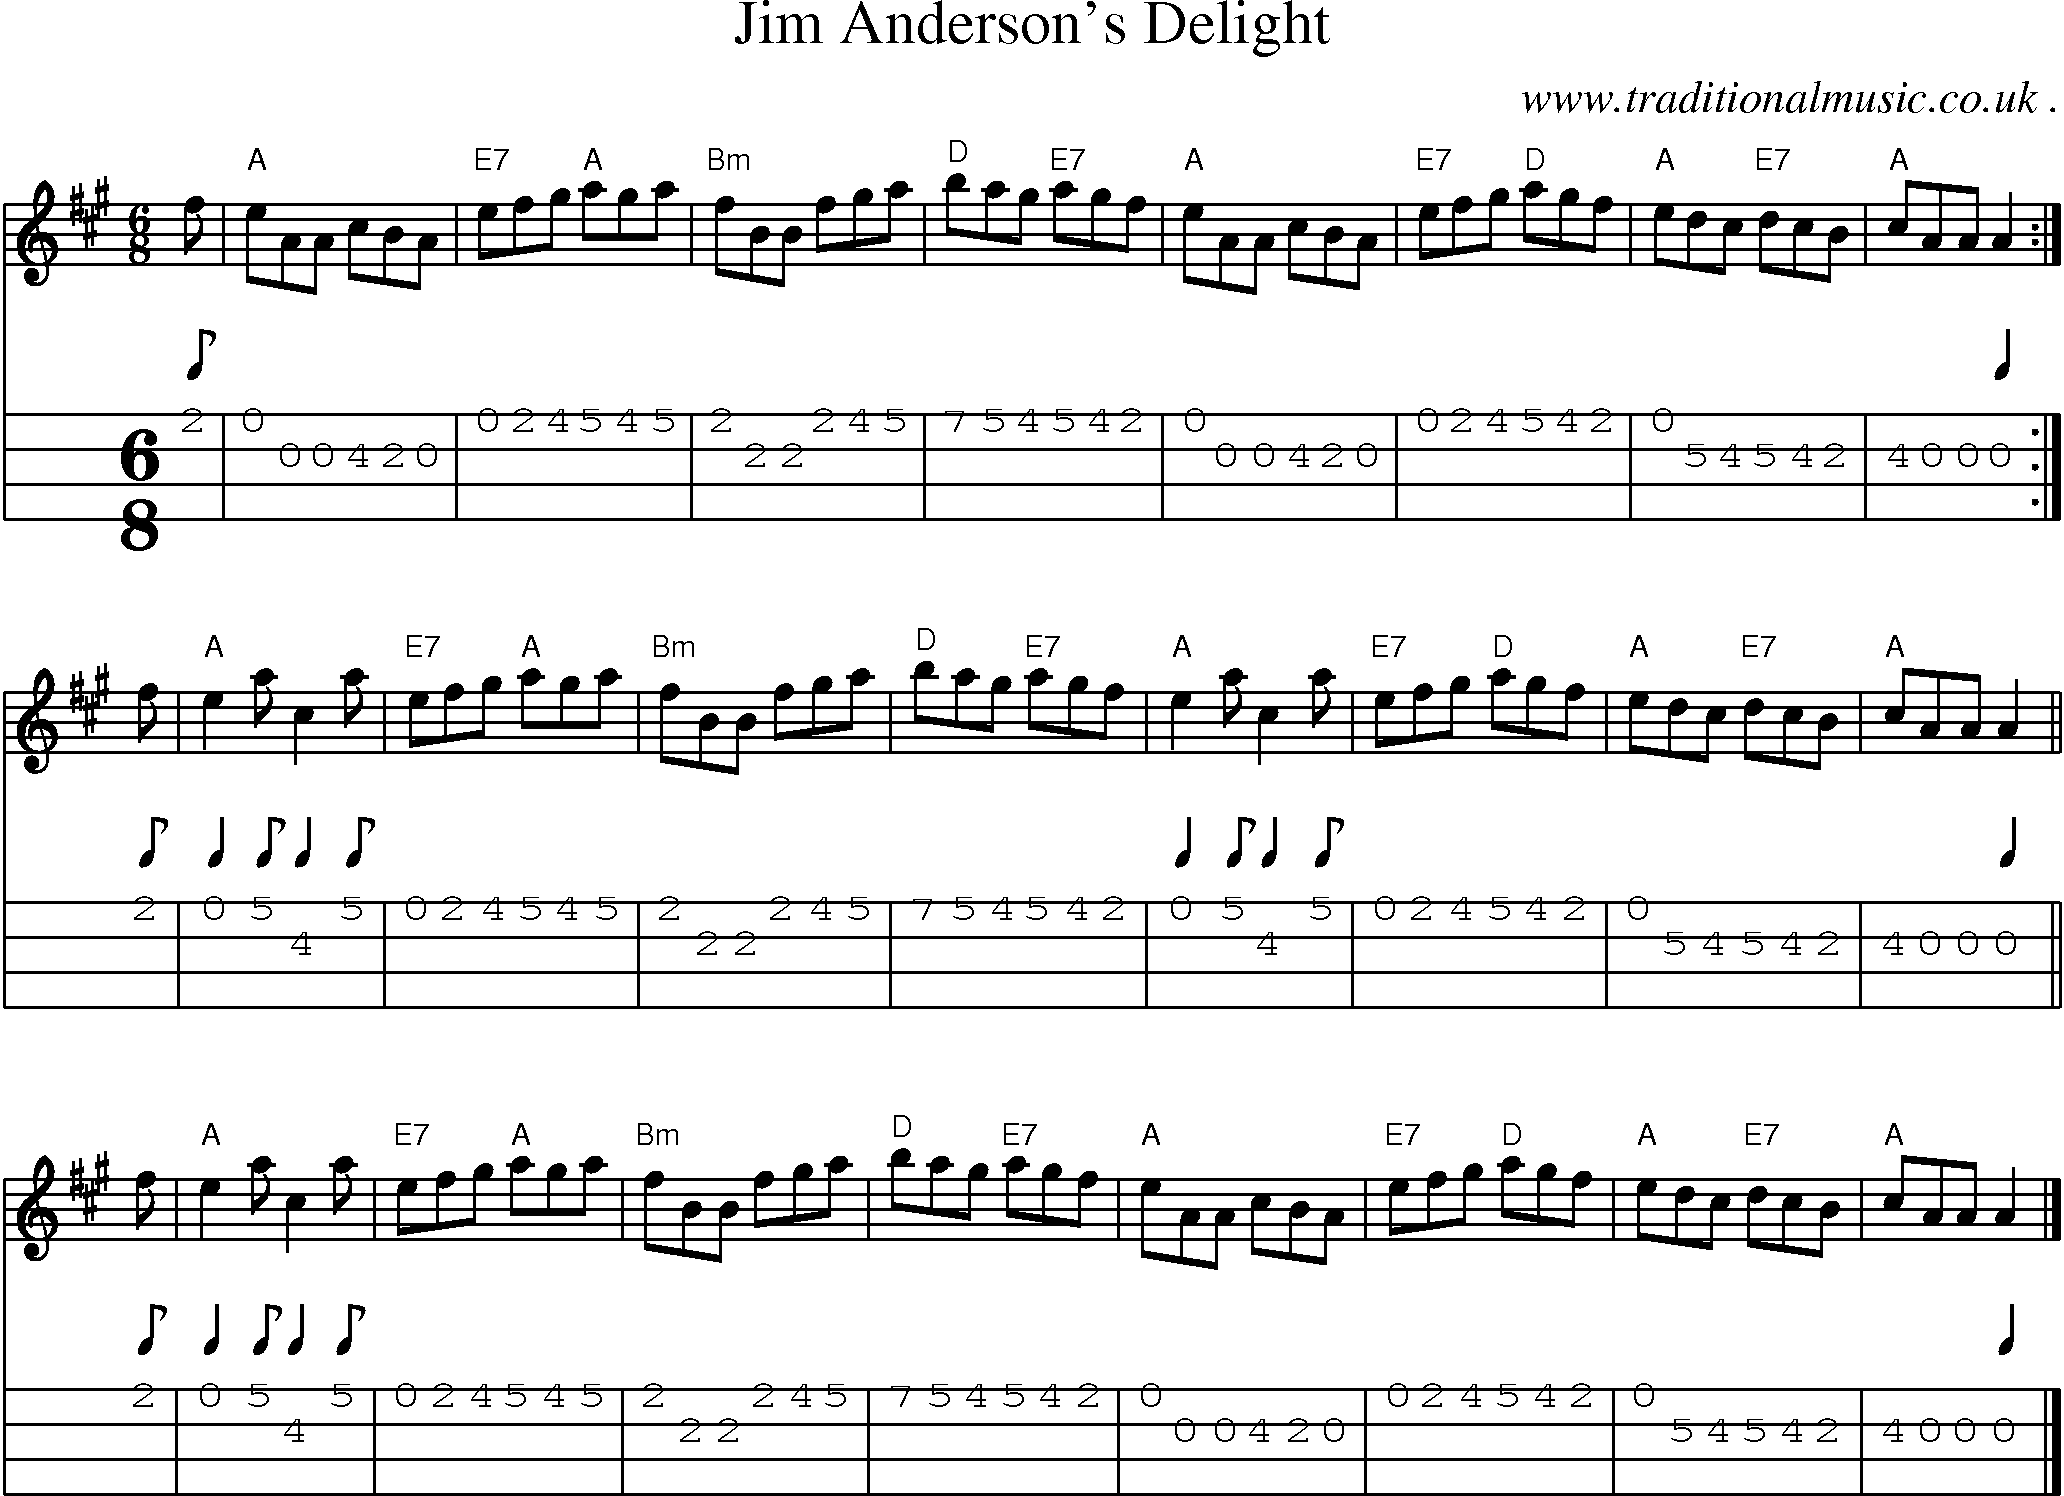 Sheet-music  score, Chords and Mandolin Tabs for Jim Andersons Delight